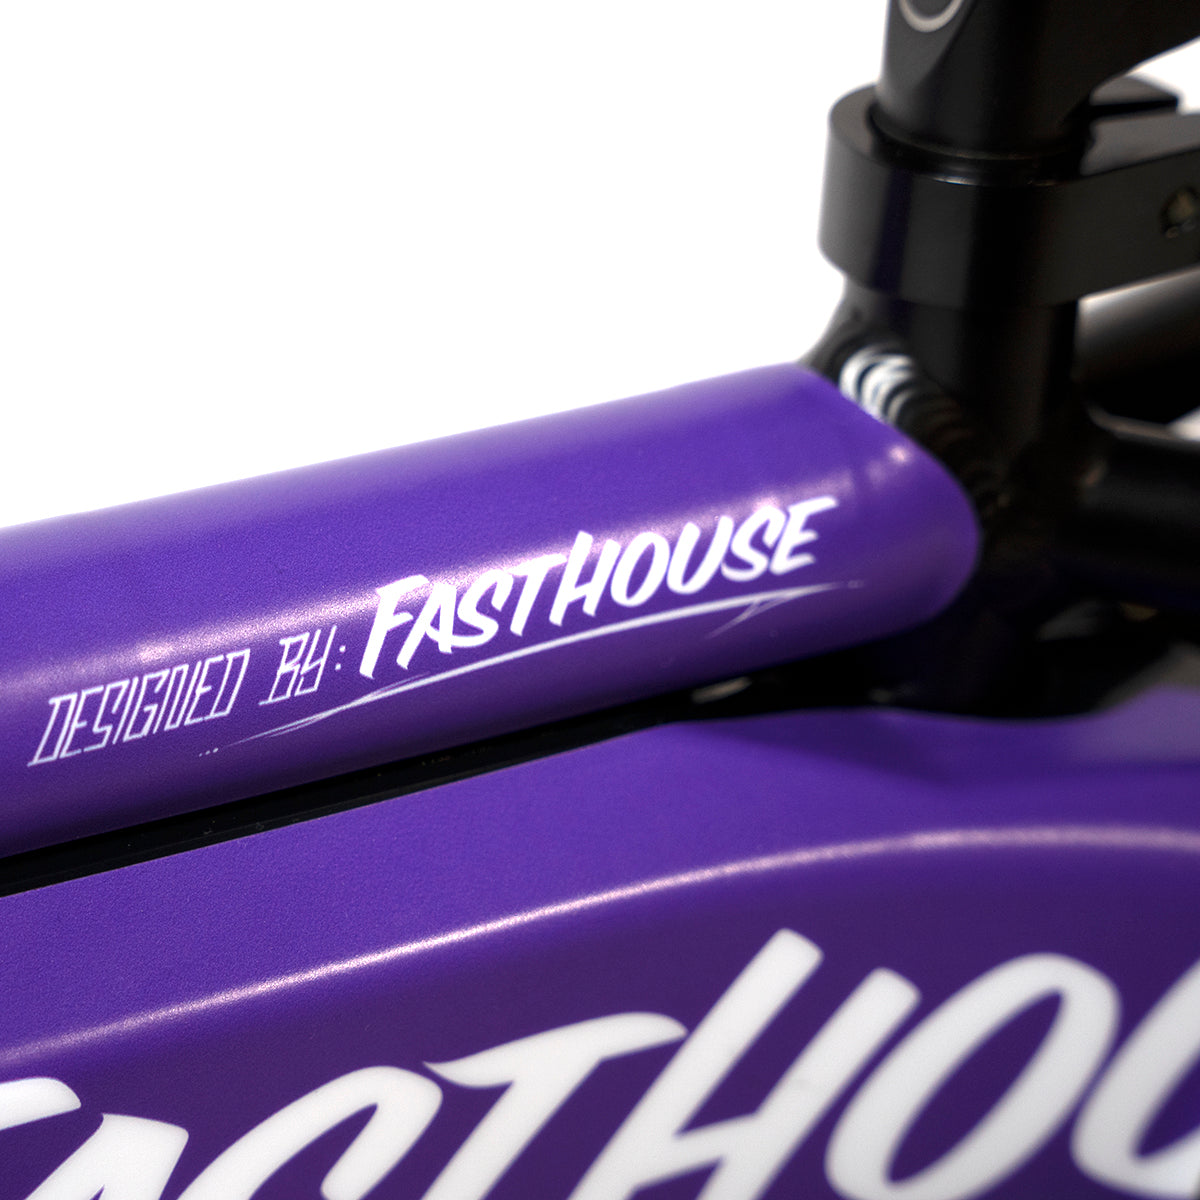 FH Tribe Stacyc Decal Kit - Purple